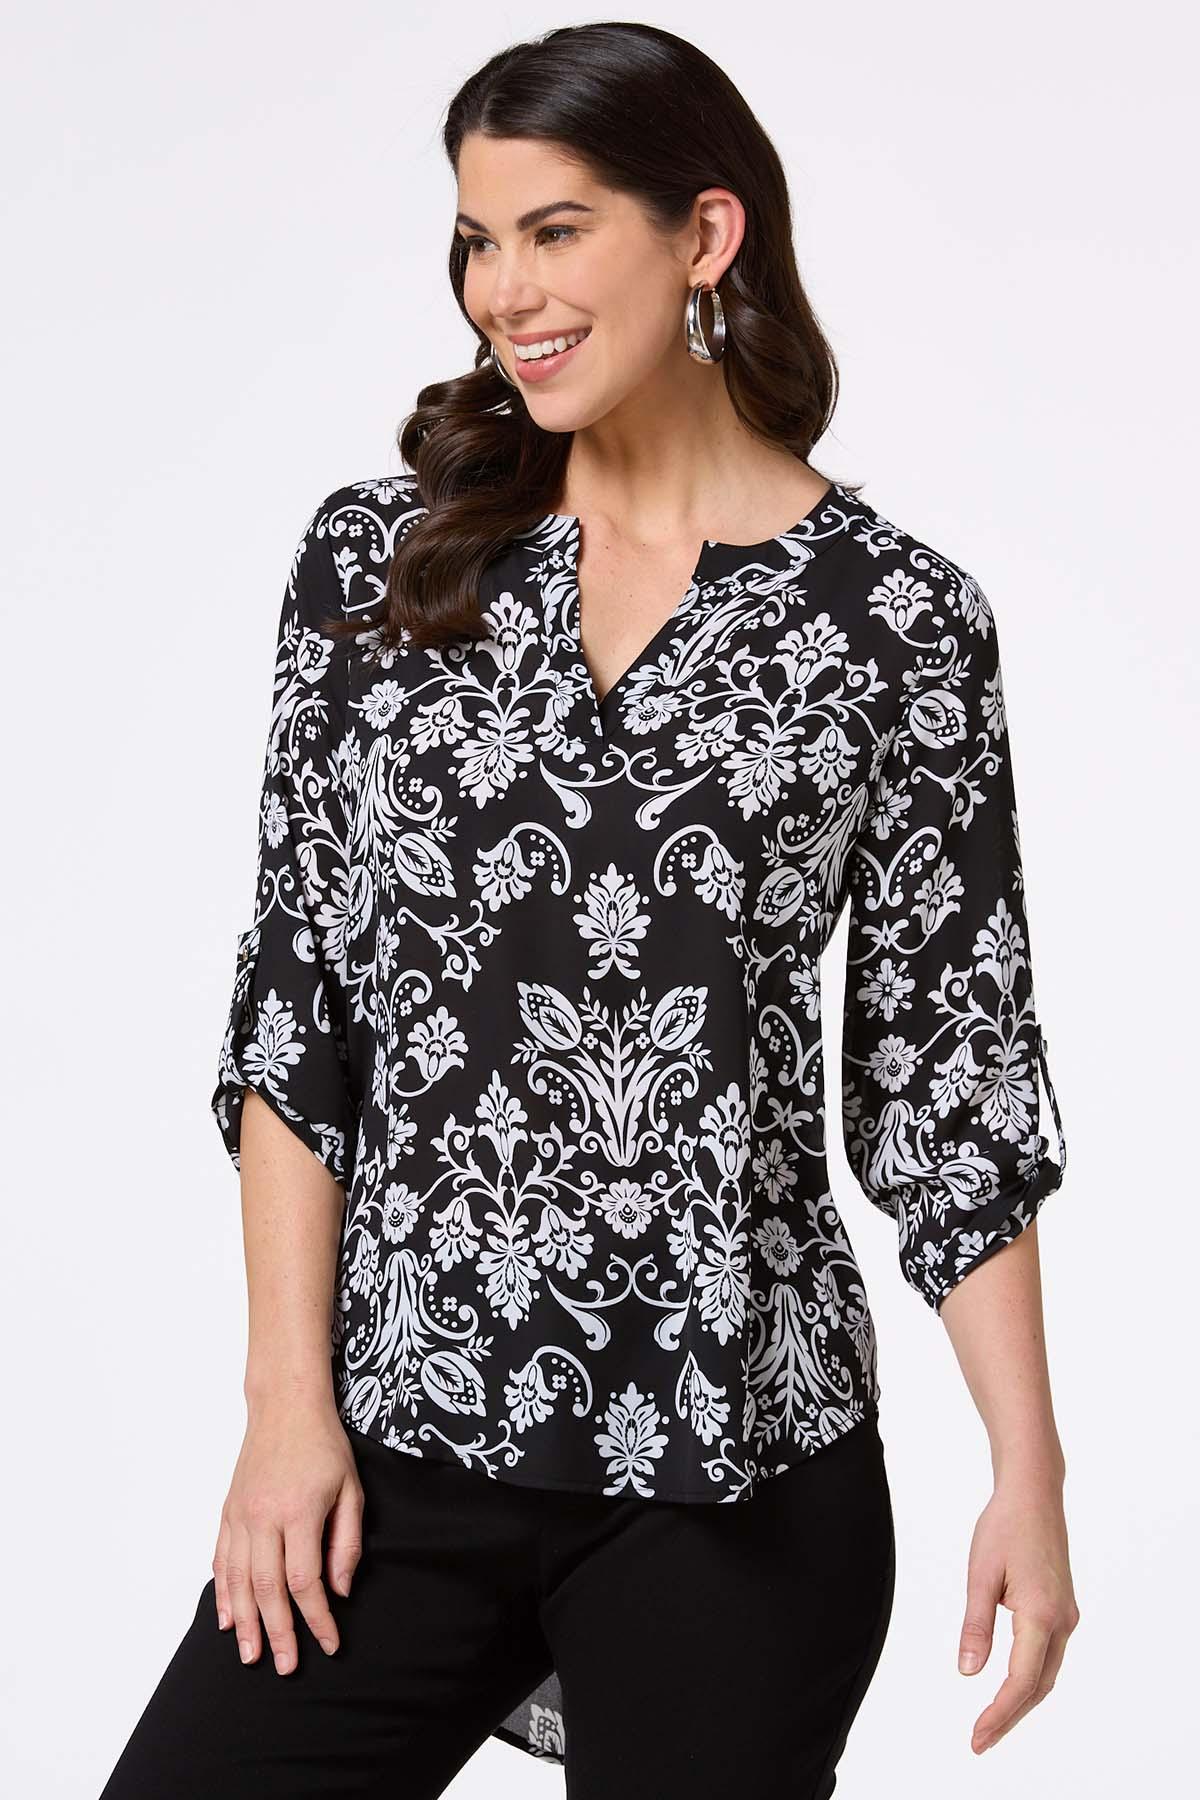 Black And White Floral Tunic